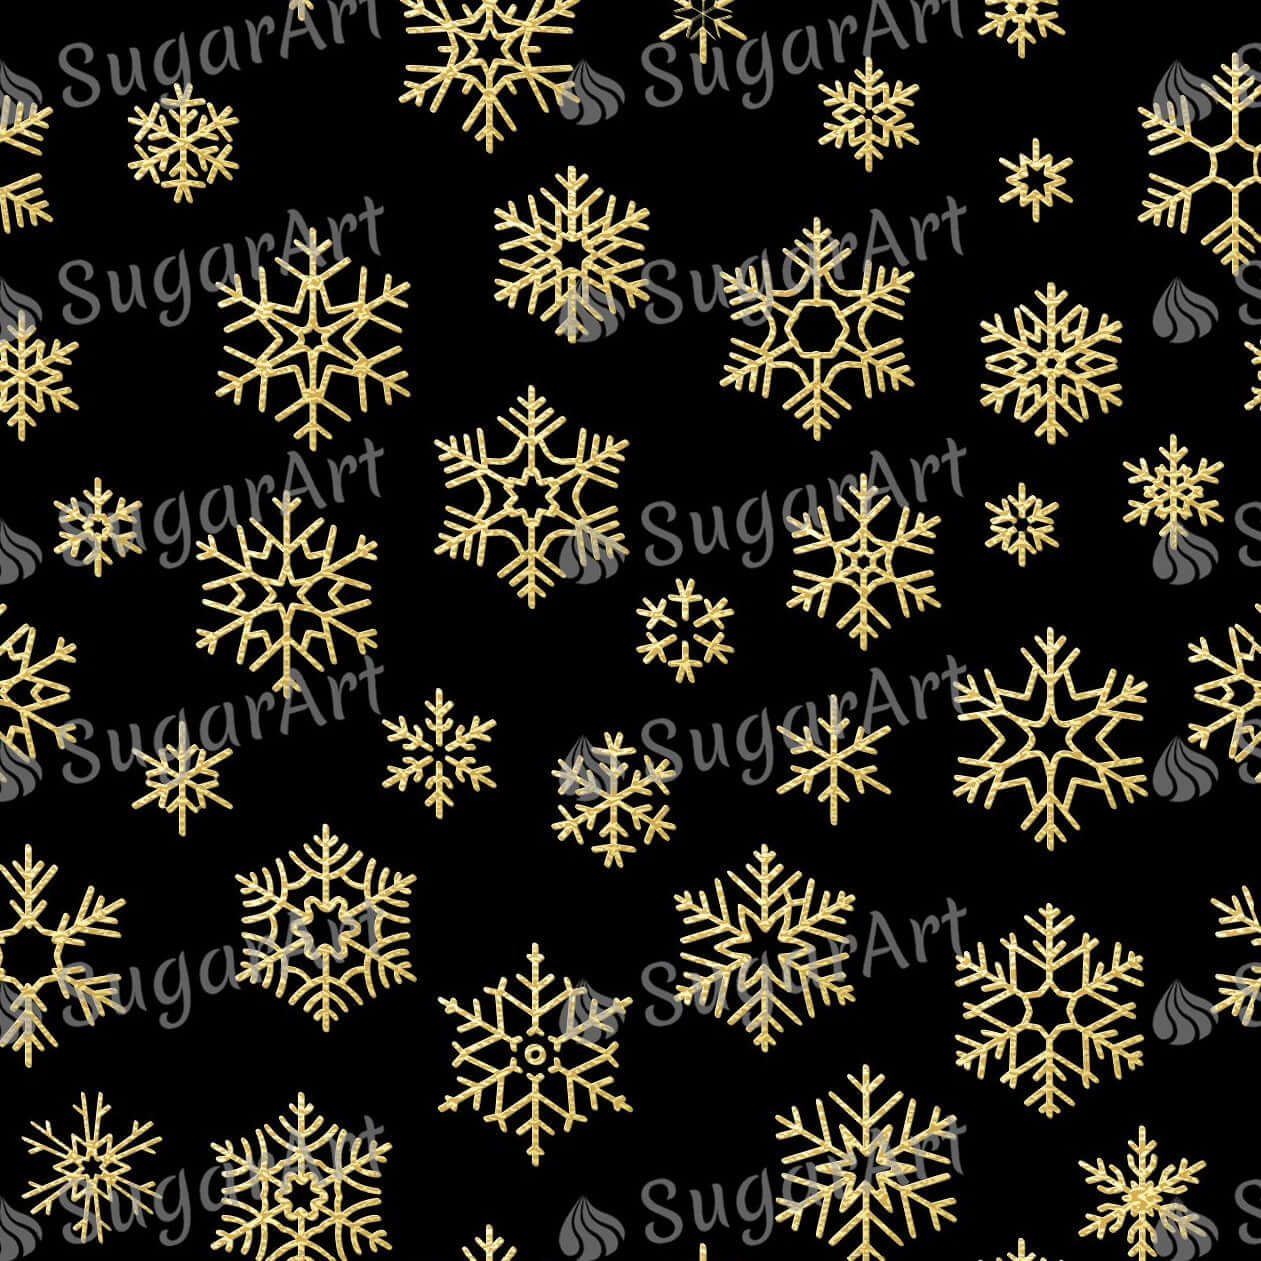 Golden Snowflakes on Black Background - Icing - ISA128.